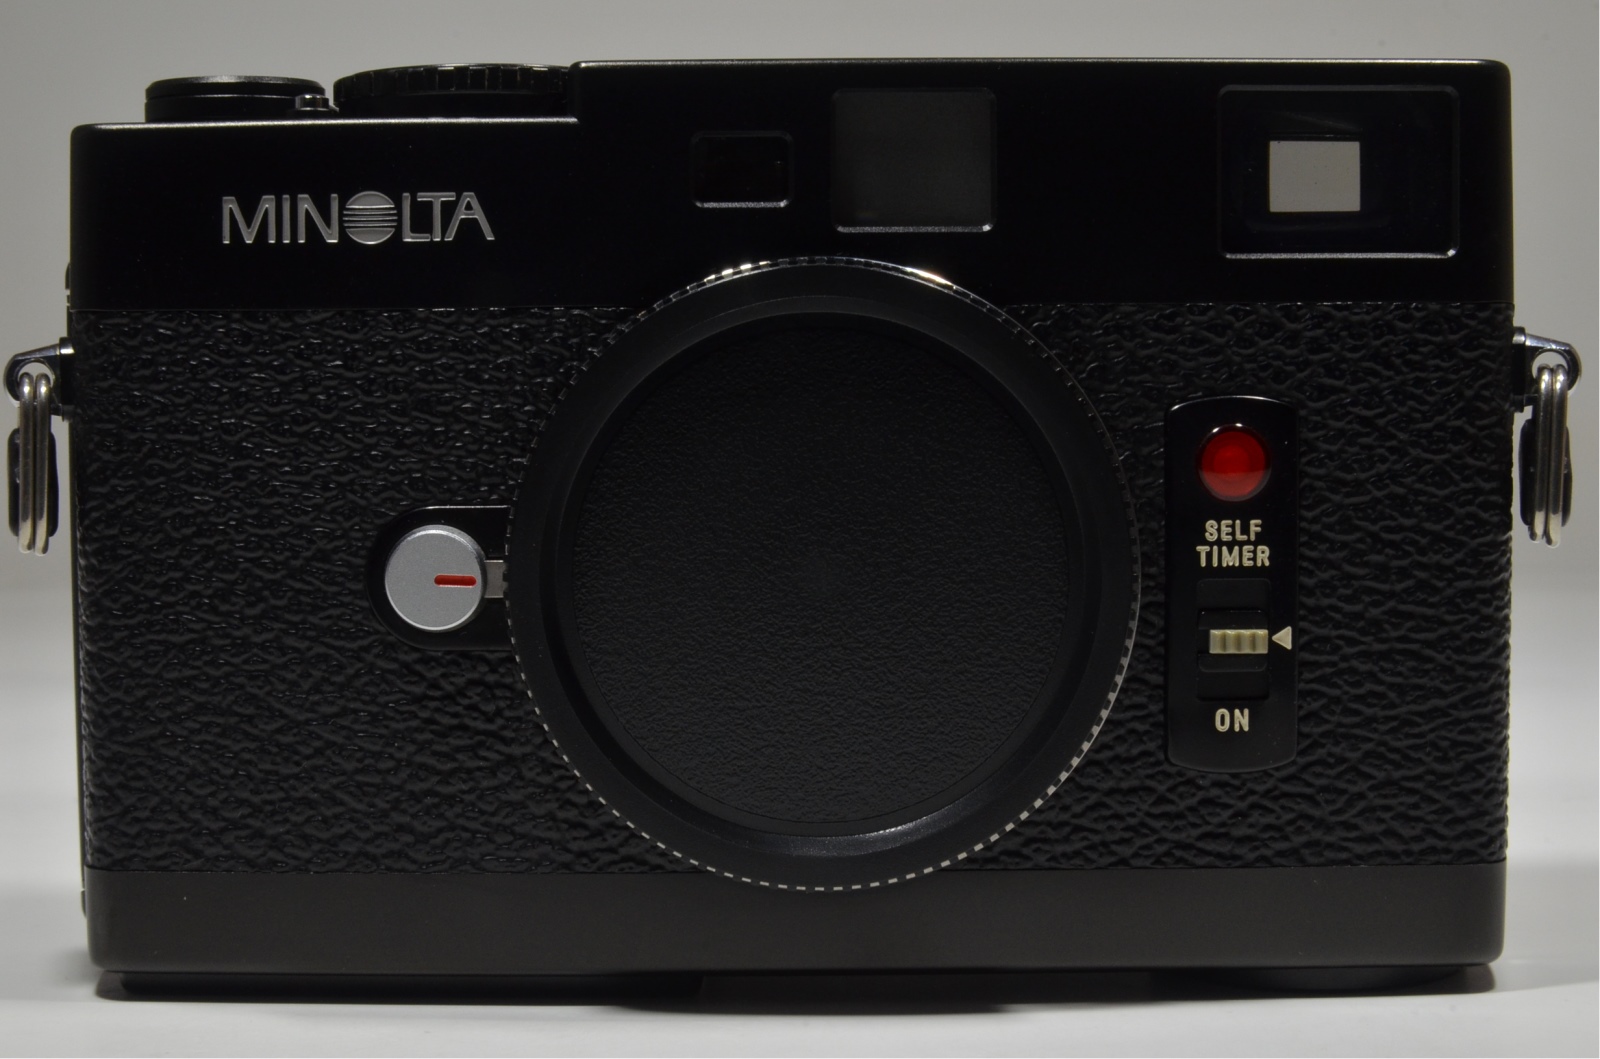 minolta cle film camera with 3 lenses m-rokkor 40mm f2, 28mm f2.8 and 90mm f4